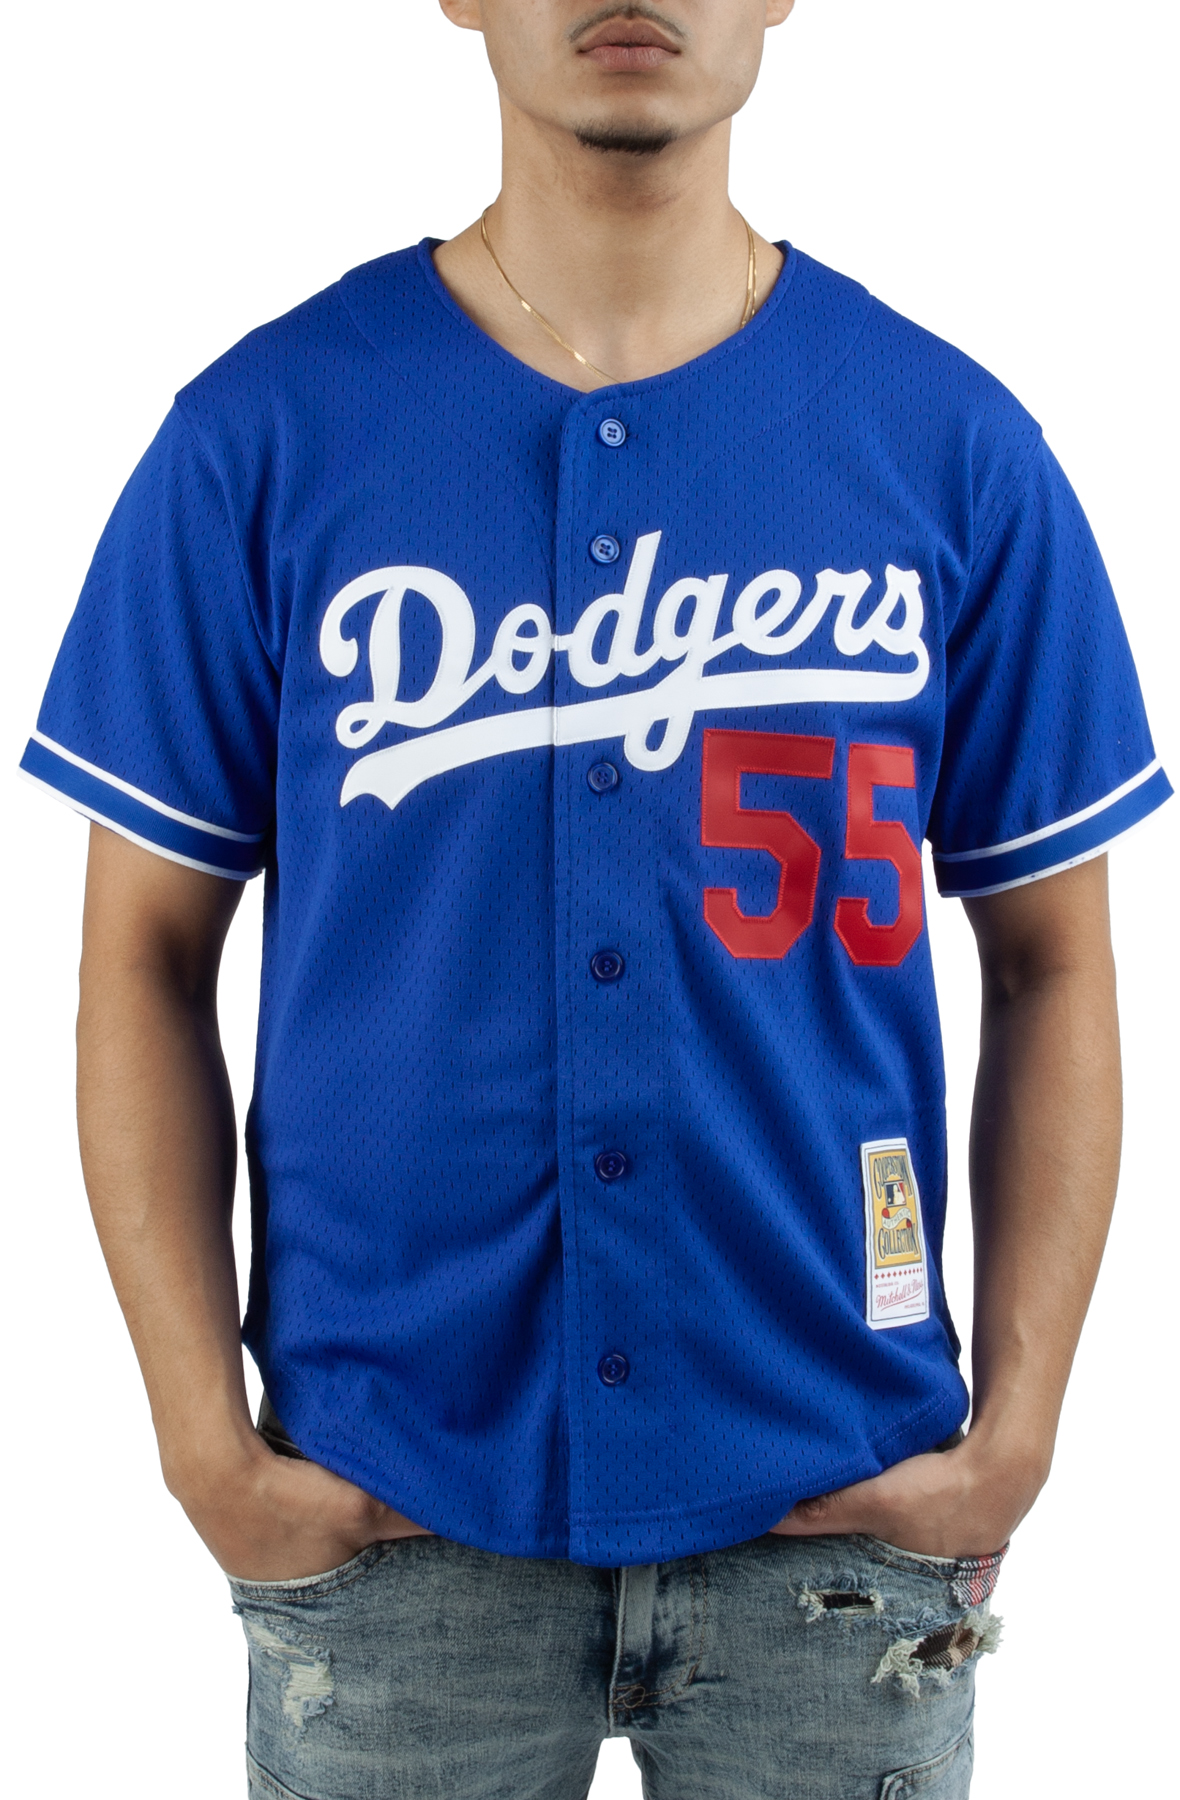 Men's Mitchell & Ness Orel Hershiser Royal Los Angeles Dodgers Cooperstown Collection Mesh Batting Practice Button-Up Jersey Size: Medium